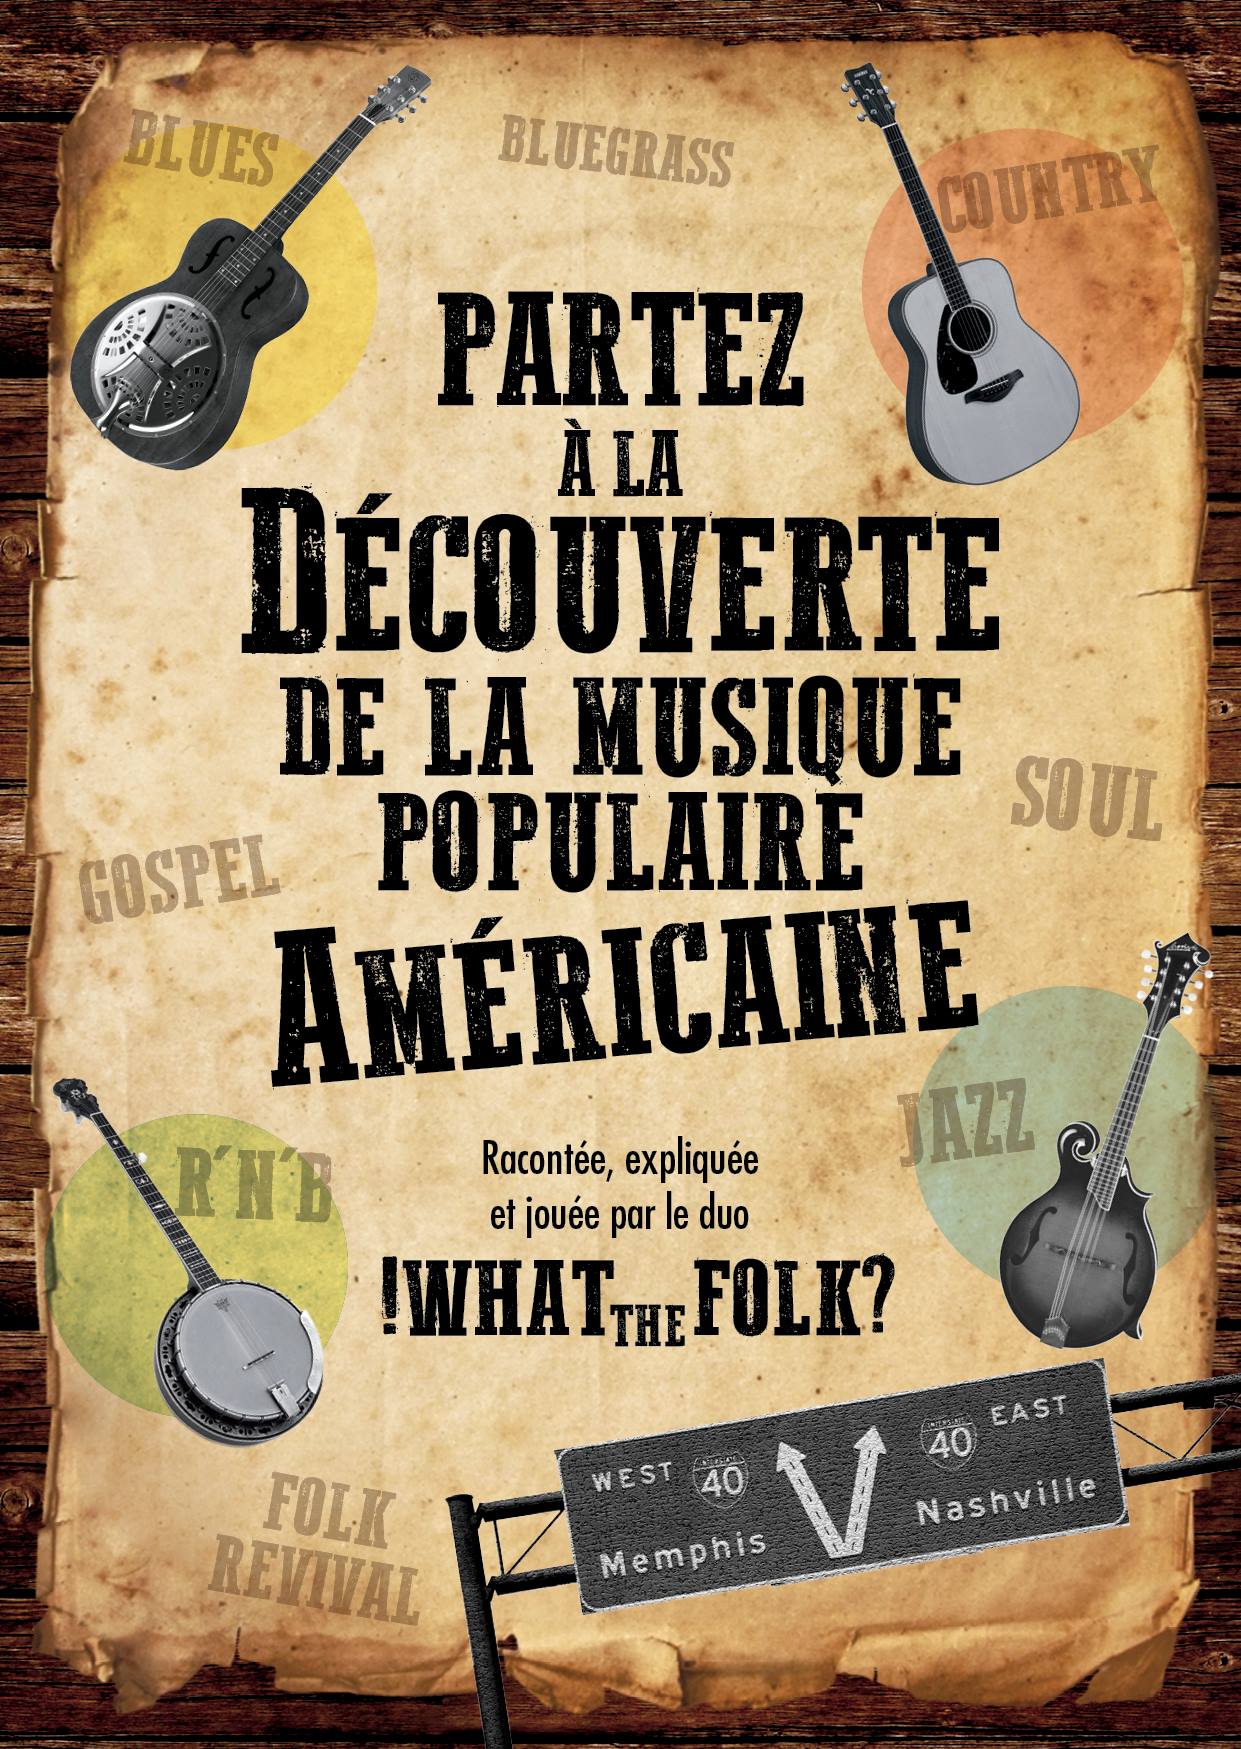 AFFICHE WHAT THE FOLK CONFERENCE